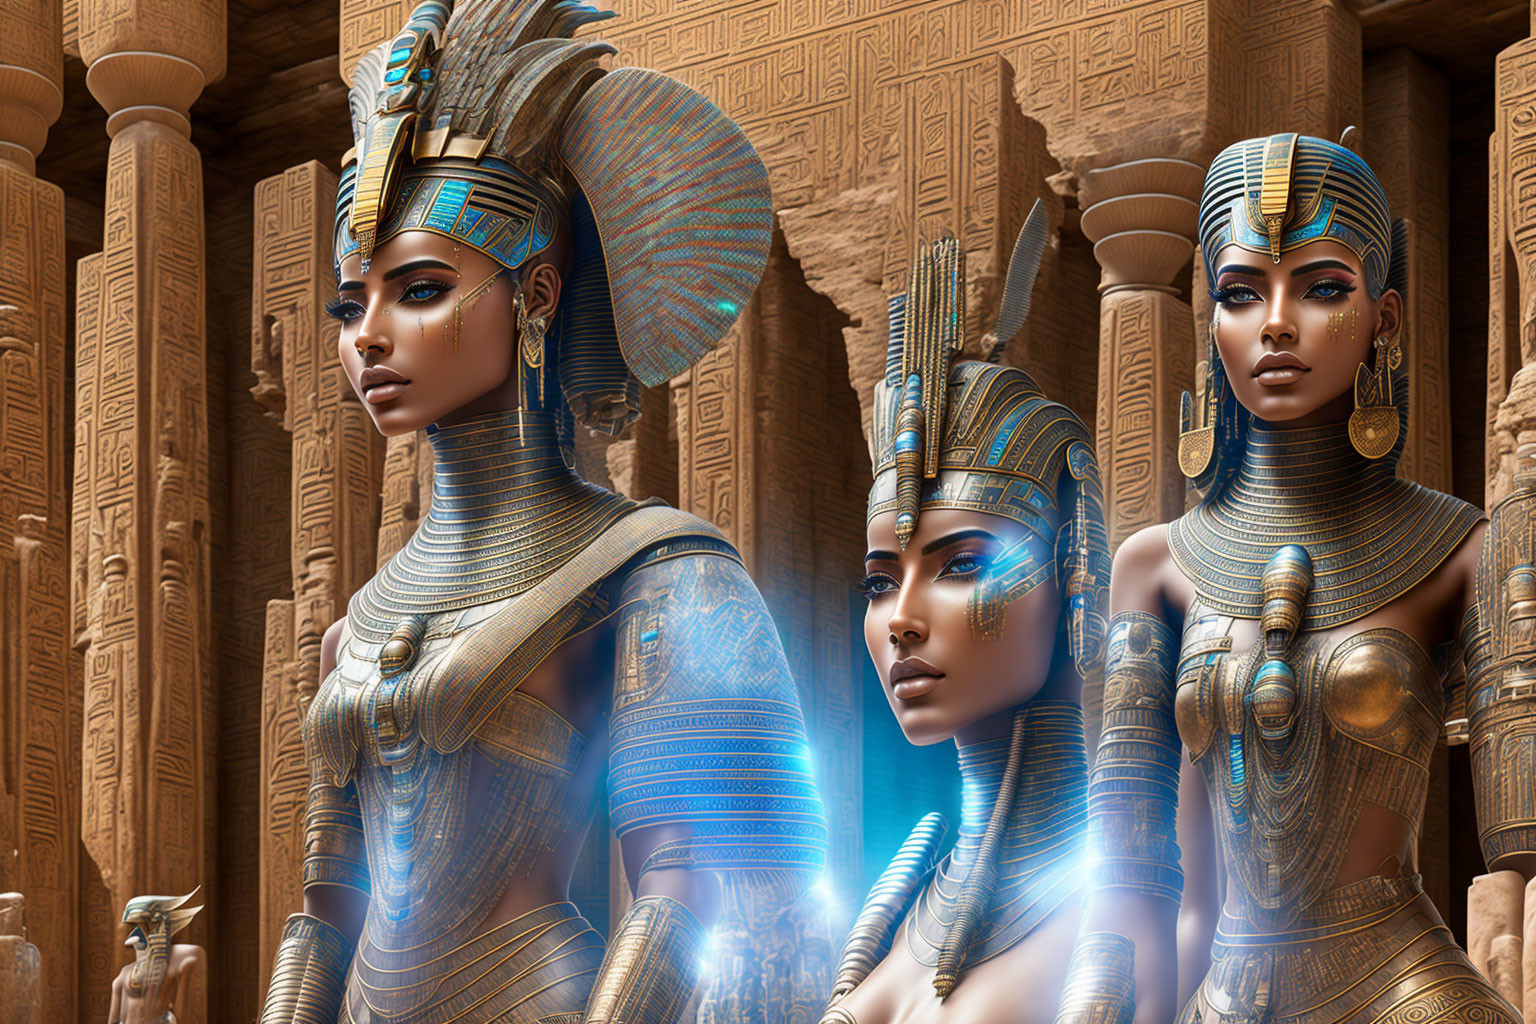 Stylized regal female figures in Egyptian attire with golden-blue armor and stone columns